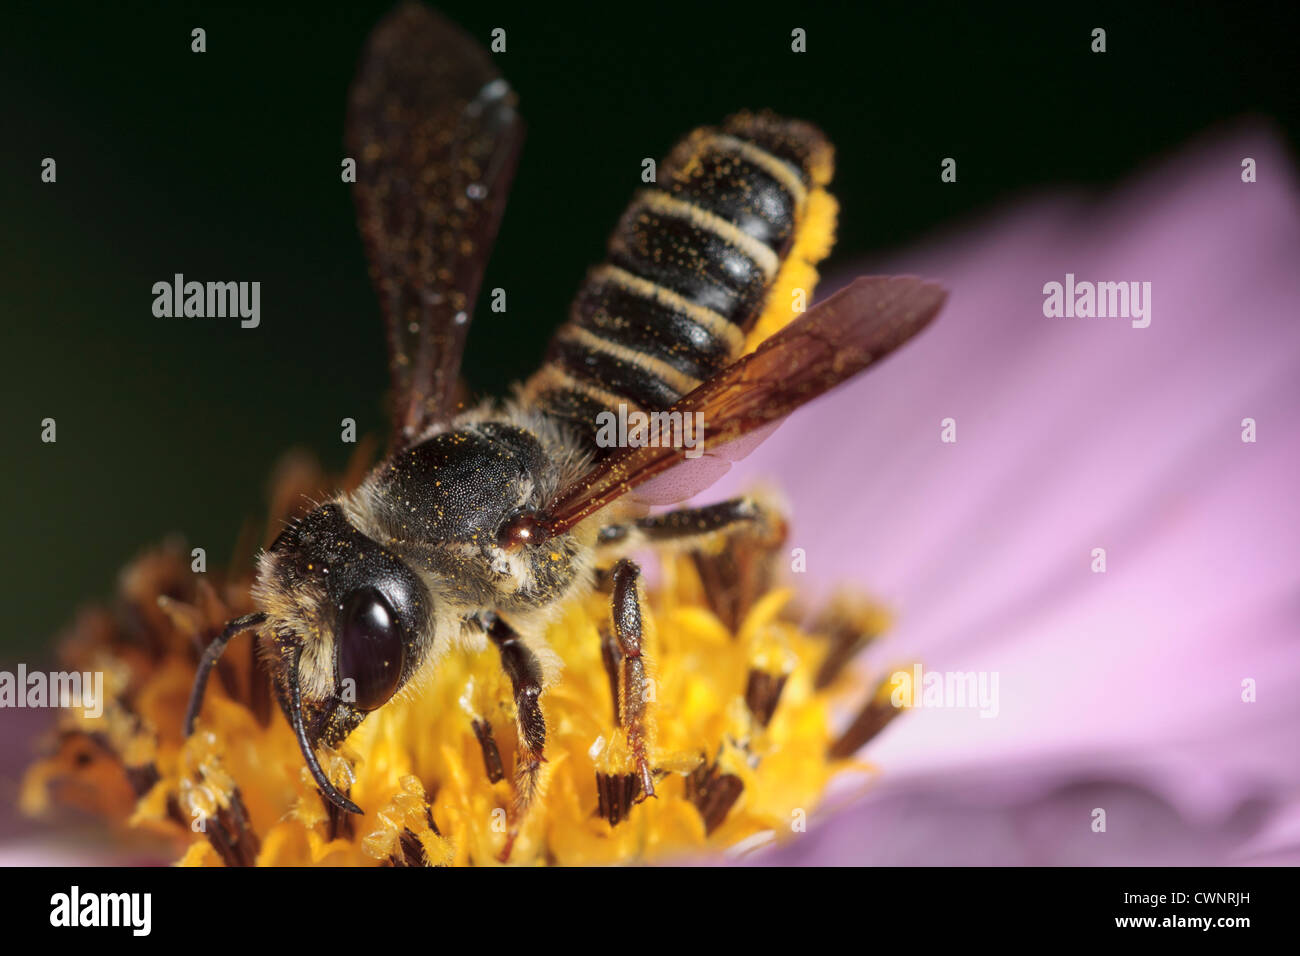 A leaf-cutter bee investigates a flower, holding the pollen she carries on her abdomen clear. Stock Photo